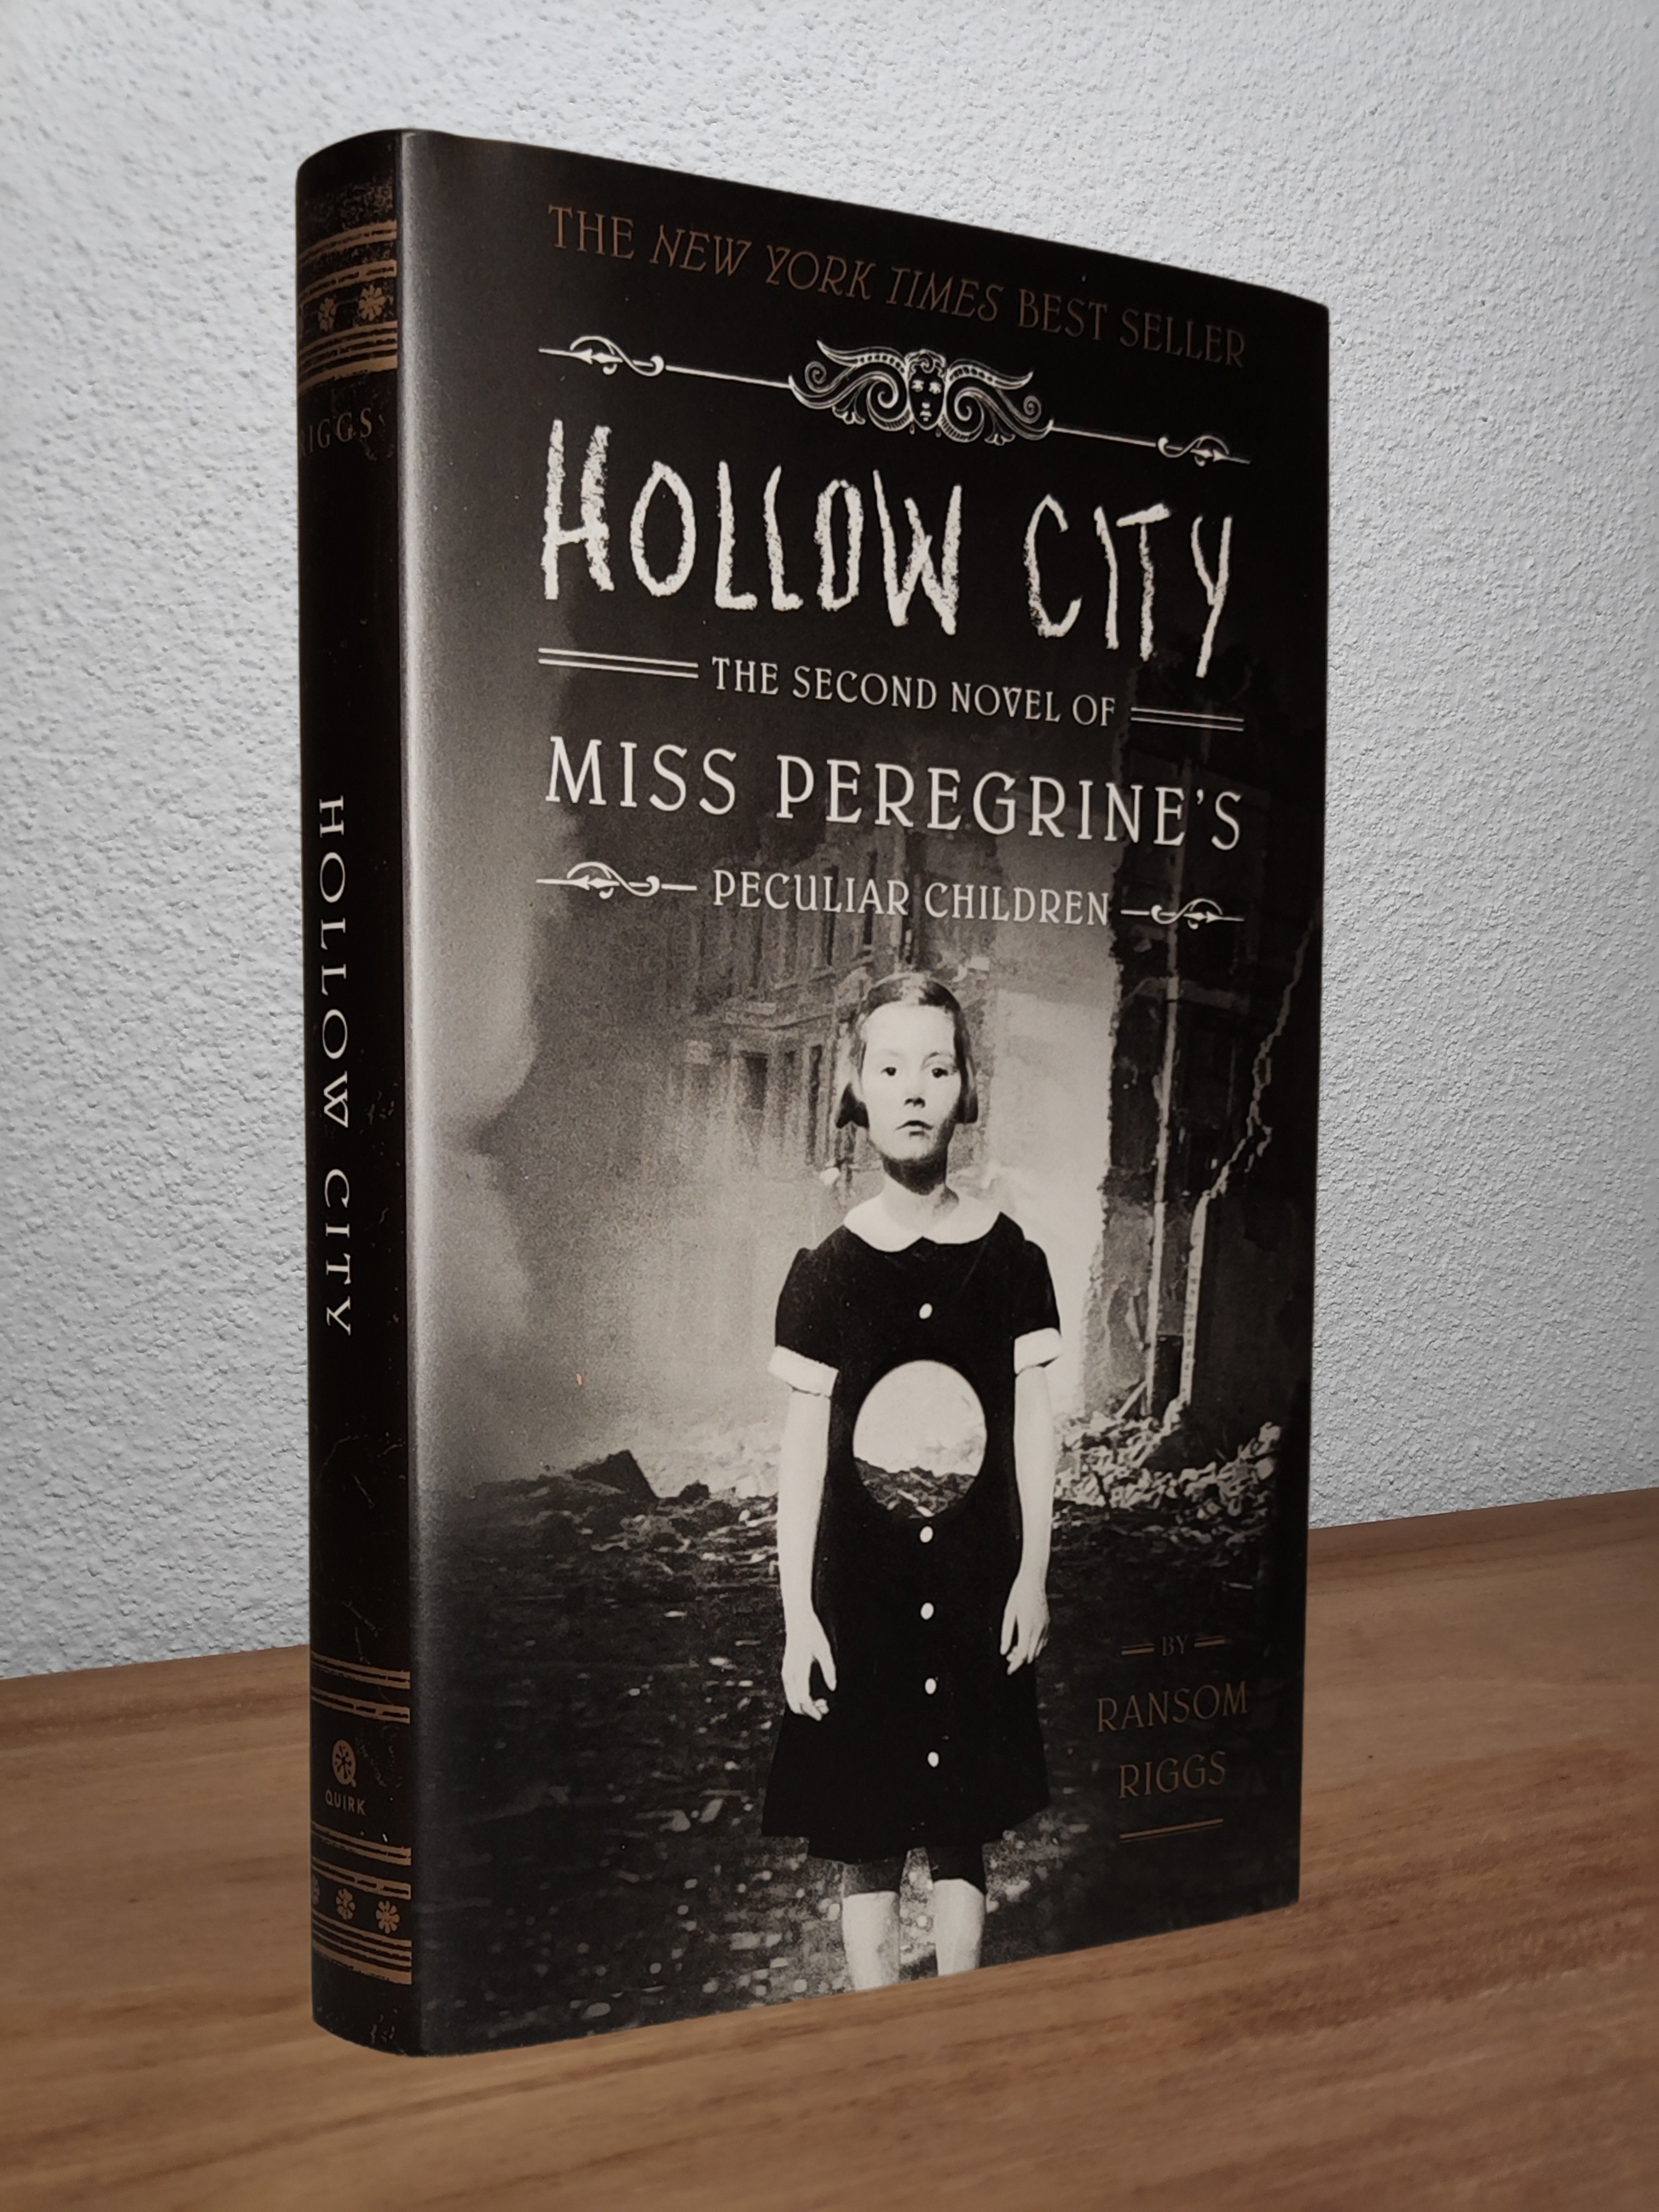 Ransom Riggs - Hollow City (Miss Peregrine's Peculiar Children #2)  - Second-hand english book to deliver in Zurich & Switzerland